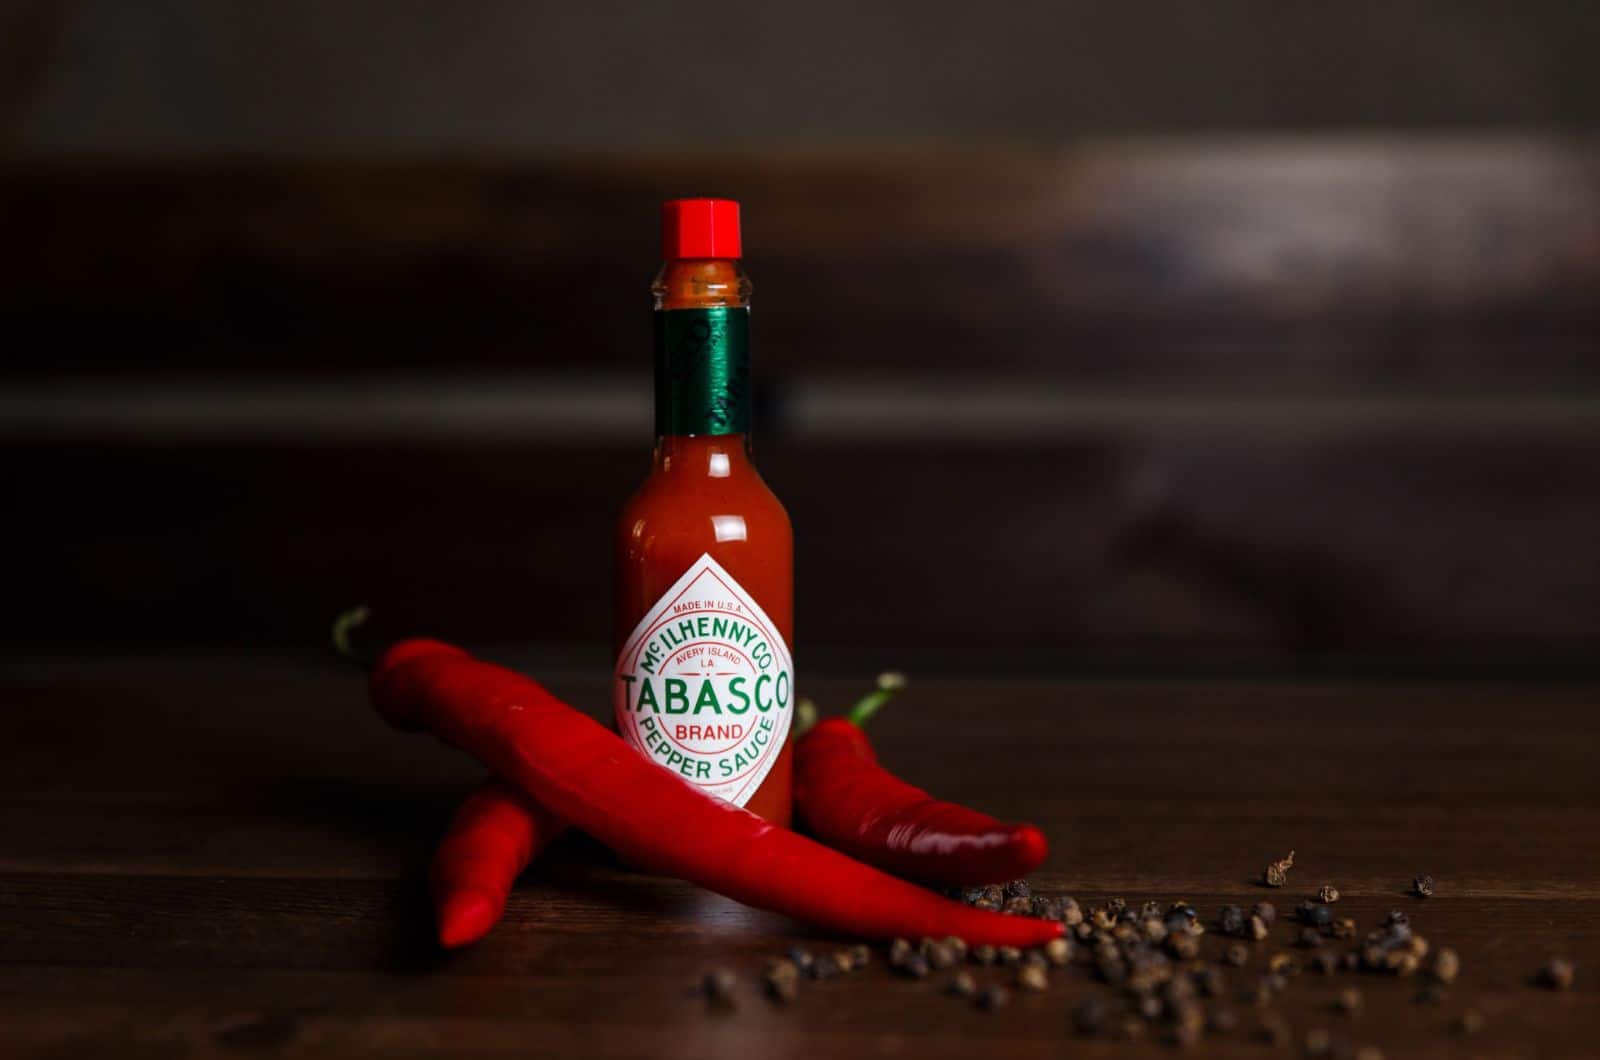  tabasco sauce bottle with red chilli and black peppers